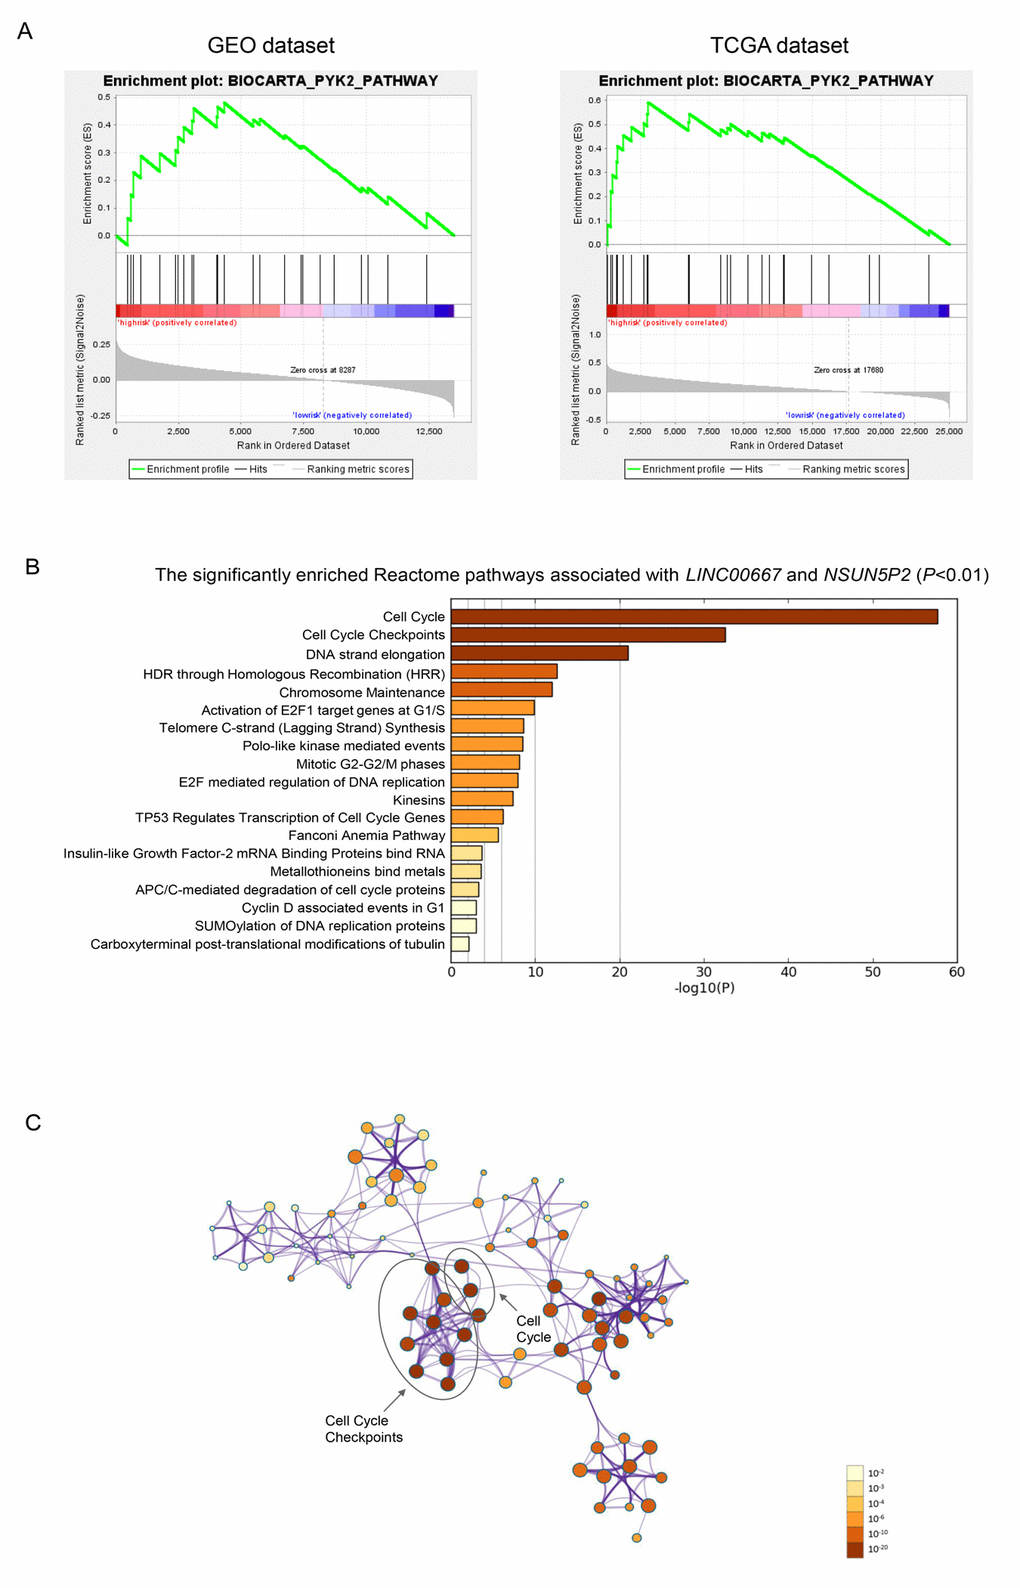 Gene enrichment analysis of the lncRNA-signature. (A) Gene set enrichment analysis in high-risk patients. Pathway PYK2 was significantly enriched in GEO (A) and TCGA (B) database simultaneously. (B) The bar chart of the significantly enriched pathways of the co-expressed genes of LINC00667 and NSUN5P2 (PC) Correction network of the significant pathway clusters (listed in panel B) visualized in Cytoscape. Each cluster was made up of the the best enriched Reactome pathways within the threshold of Kappa-statistical similarity (0.3). Each node represented one enriched term and was colored by P value. In the figure, the top 2 enriched pathways and the clusters they belonged to were marked.